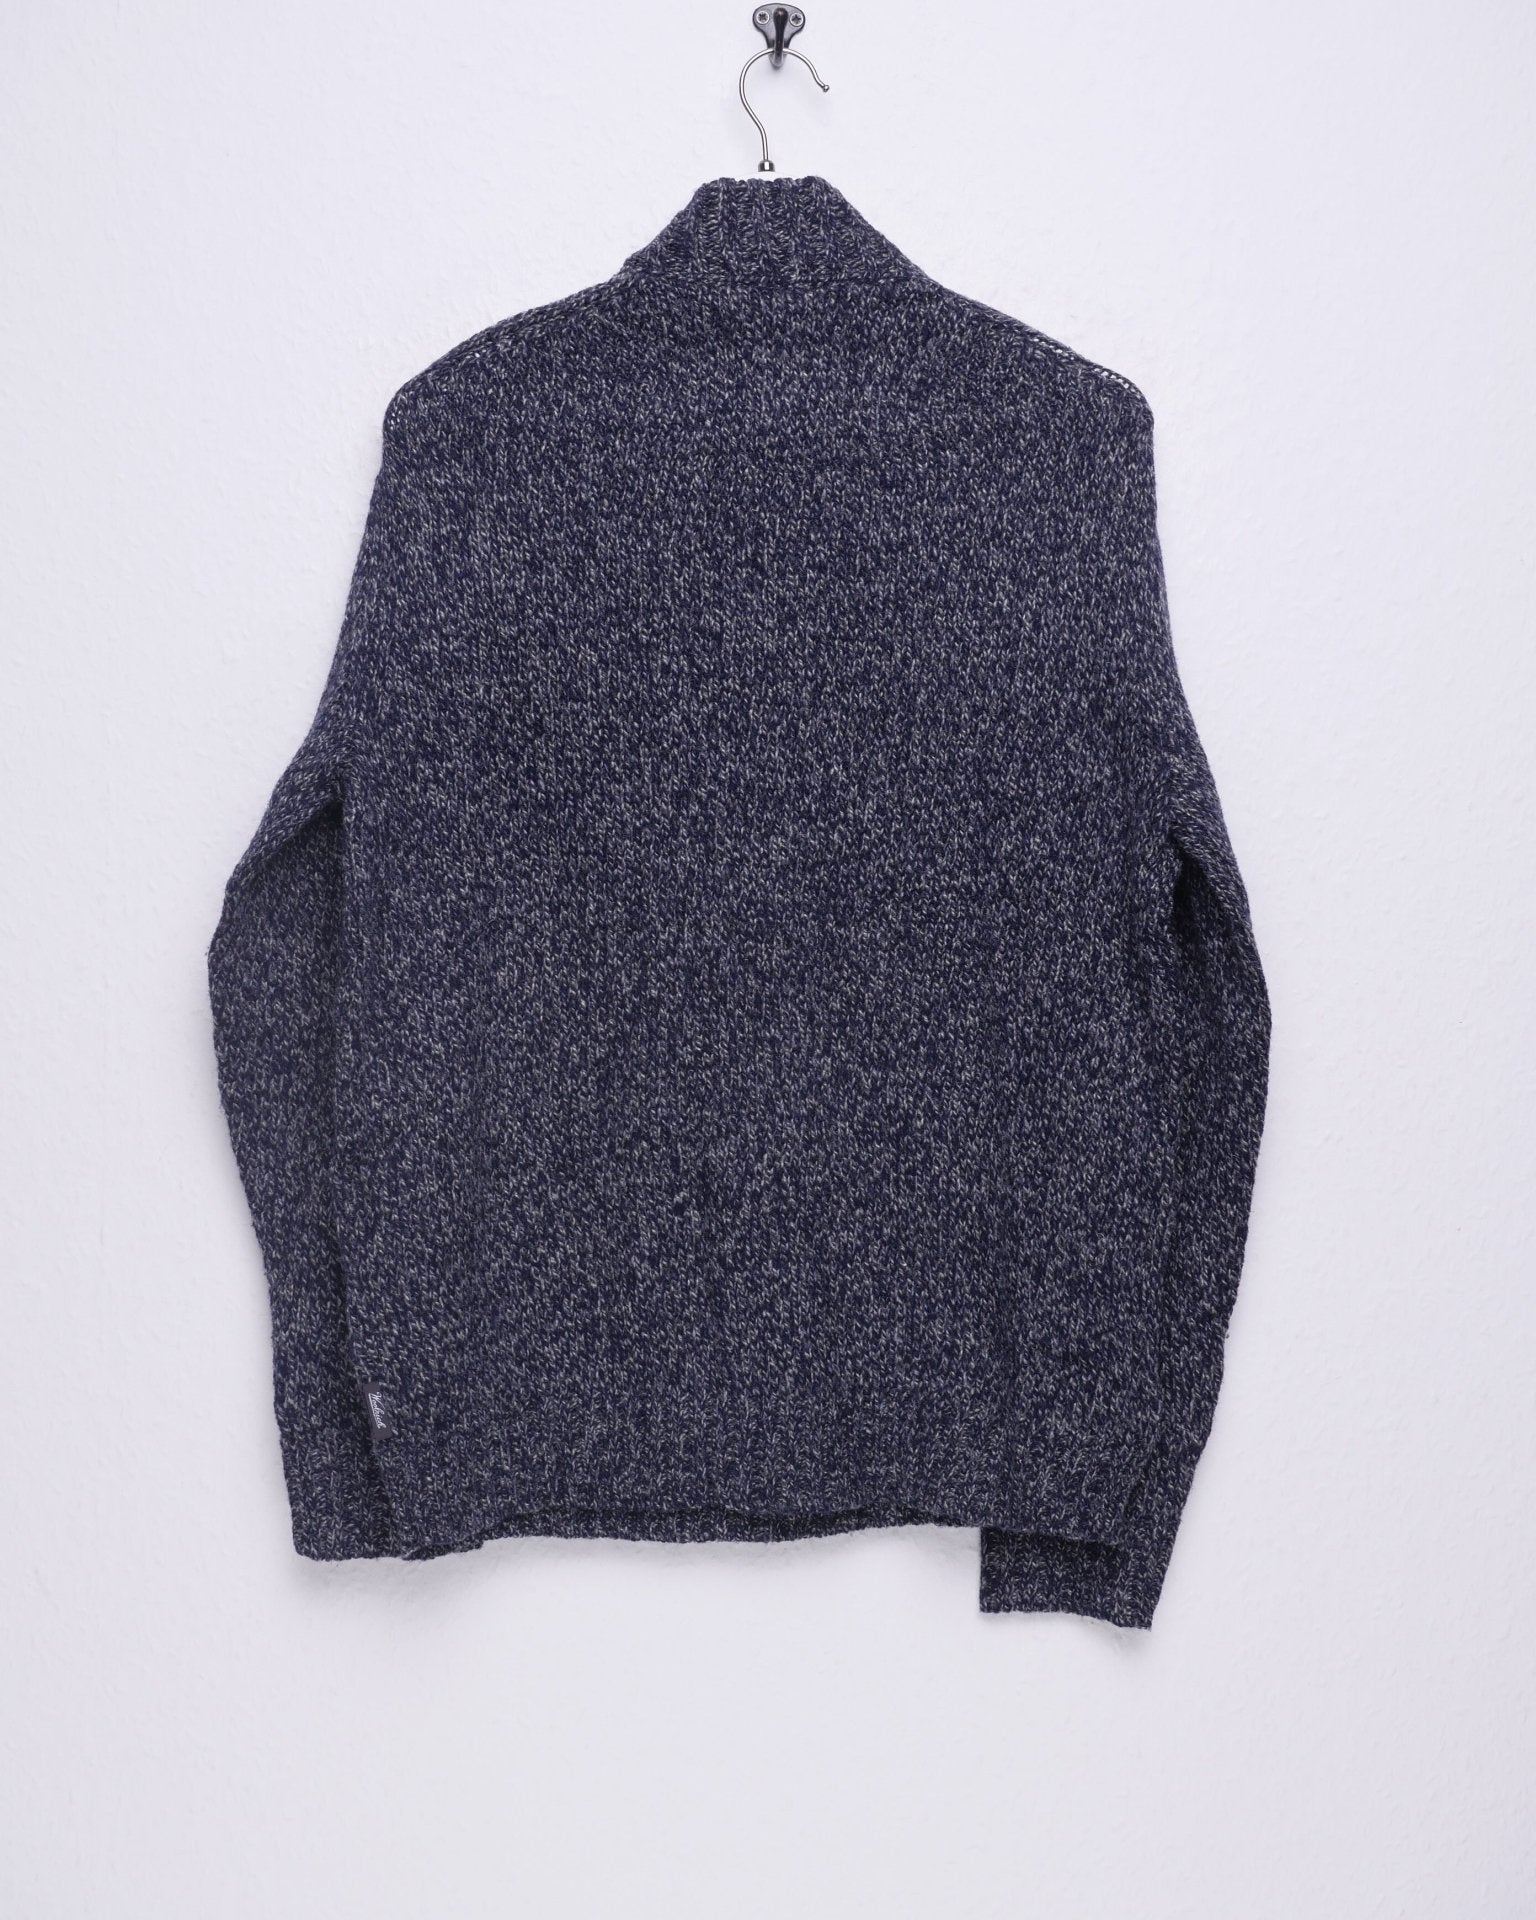 Woolrich two toned Vintage Zip Sweater - Peeces